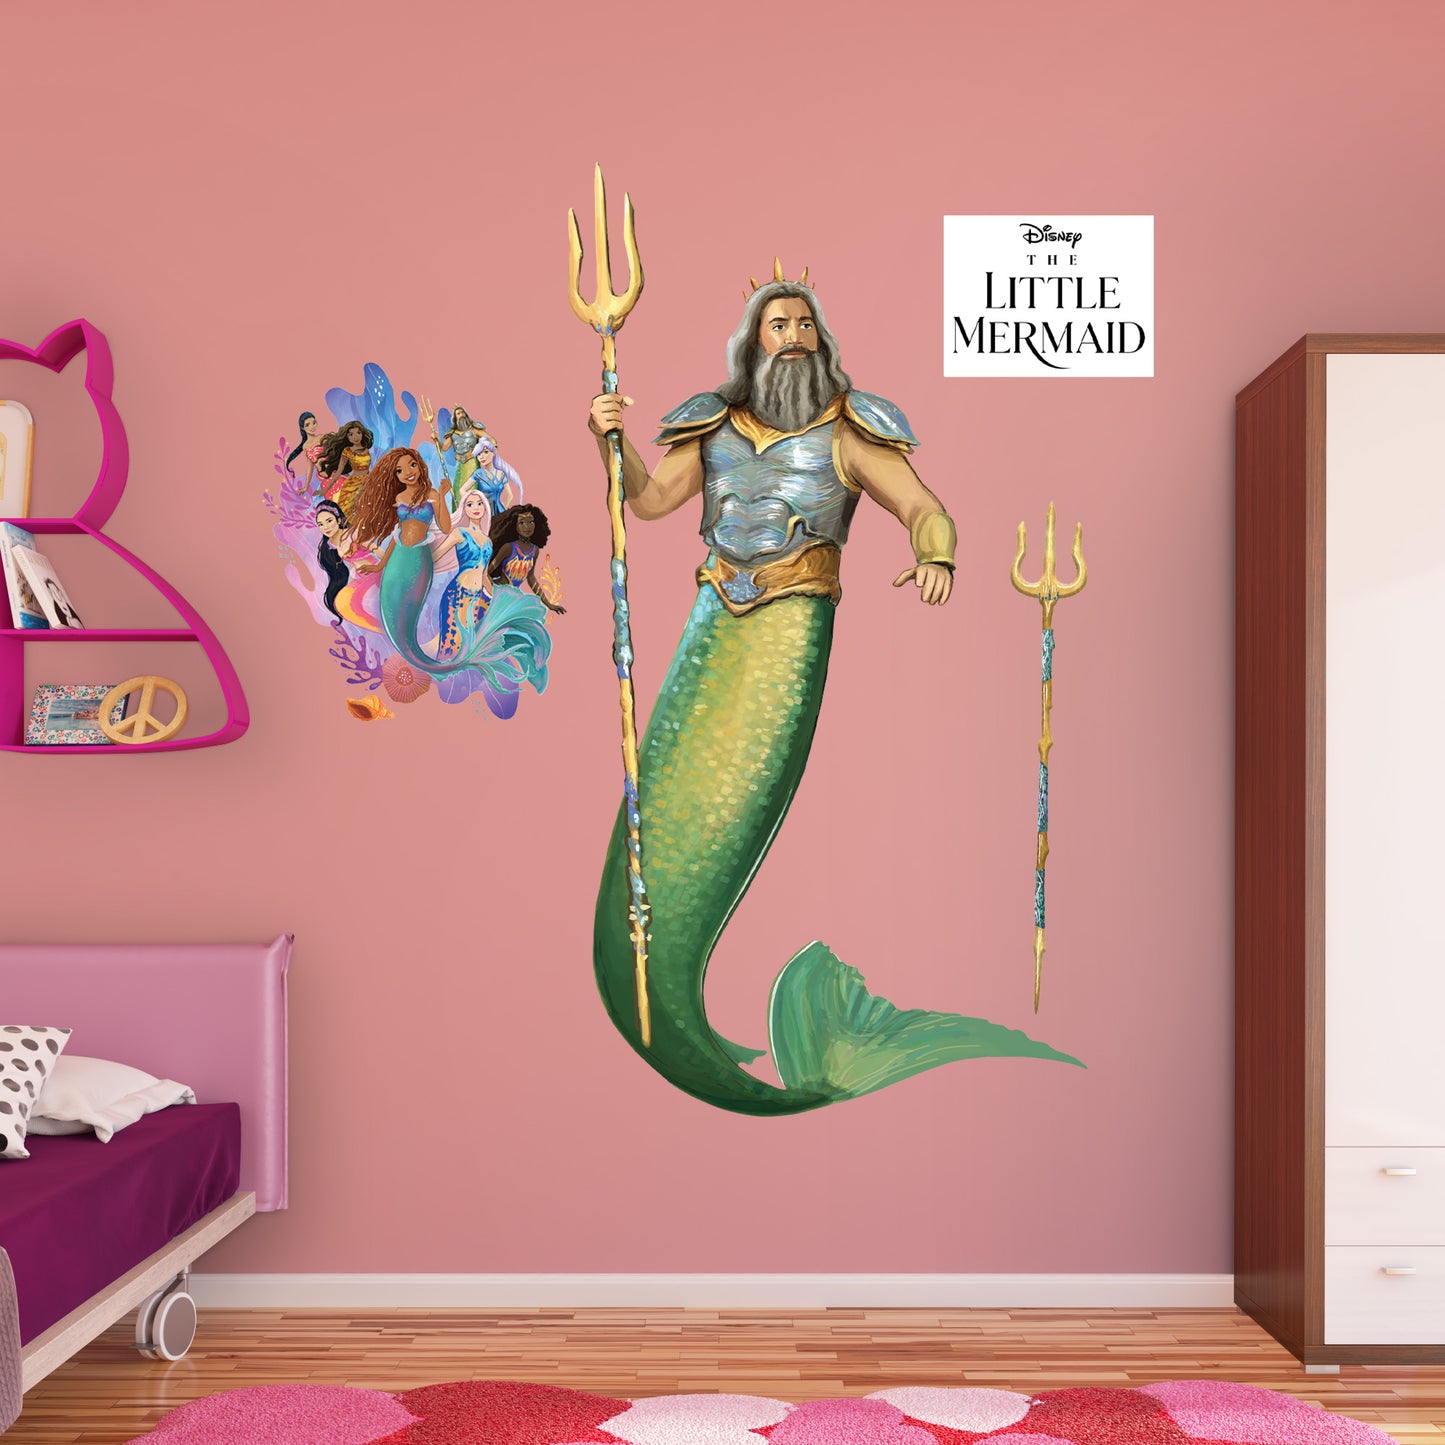 Life-Size Character +3 Decals  (43"W x 79"H) 